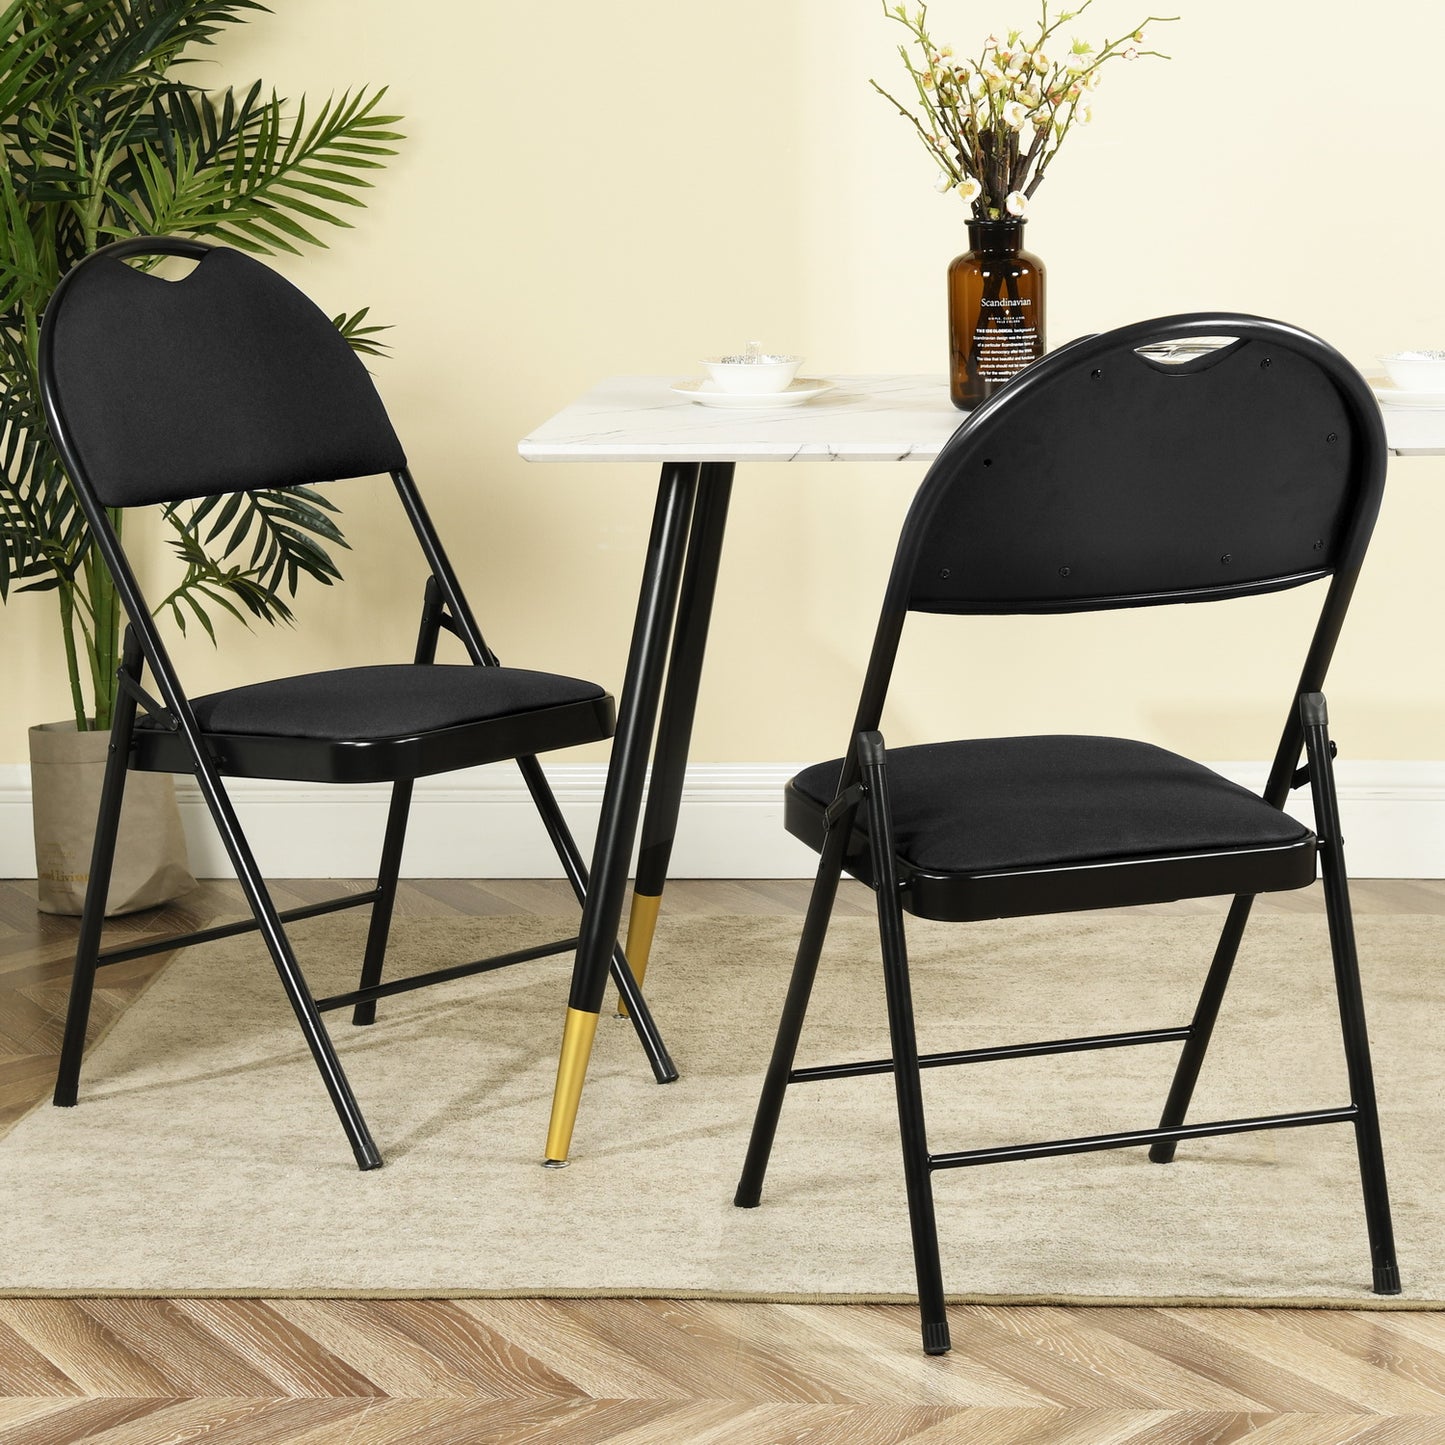 ERVIN Padded Stackable Folding Chairs (Set of 6)